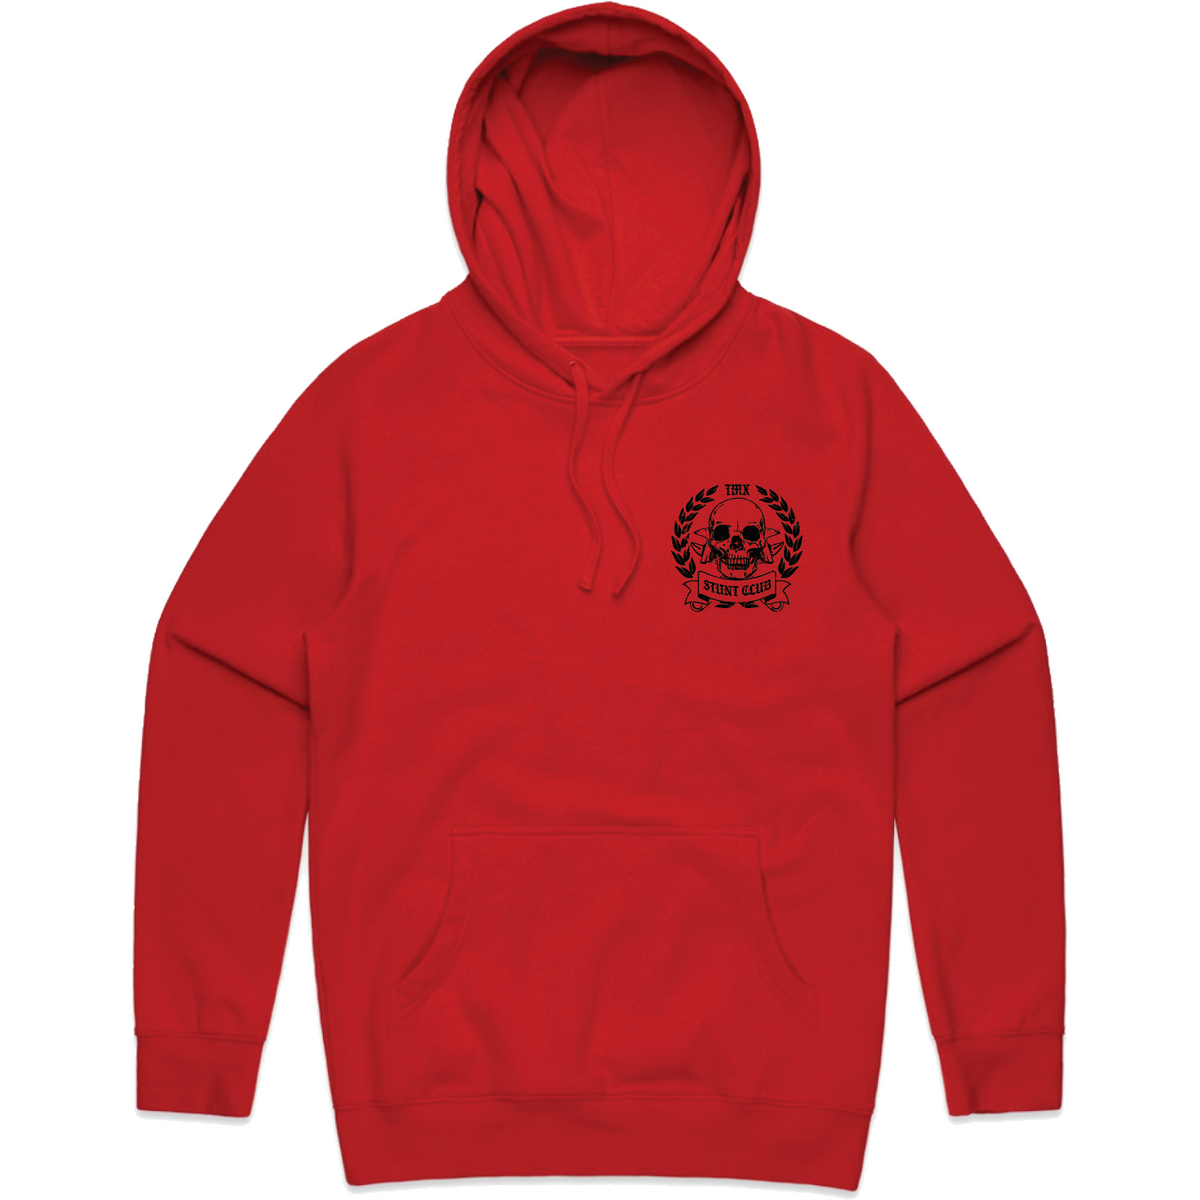 TMX-Men's-Knit-Hooded-Pullover-Built-2-Ride-2023 - General - Synik Clothing - synikclothing.com